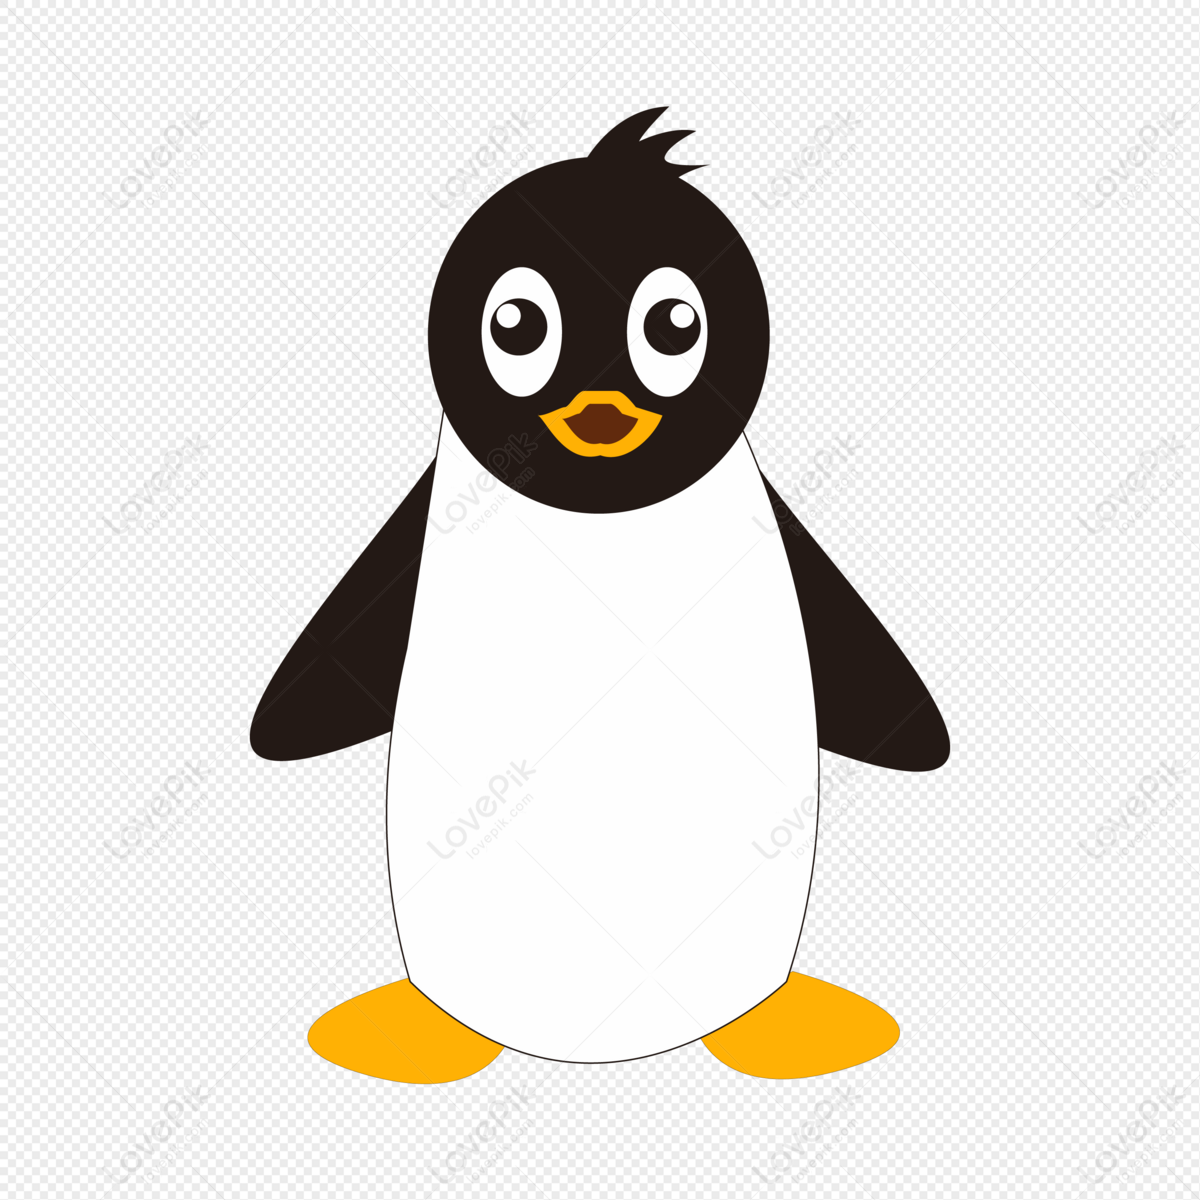 Cartoon Little Penguin PNG Image Free Download And Clipart Image For Free  Download - Lovepik | 401340771